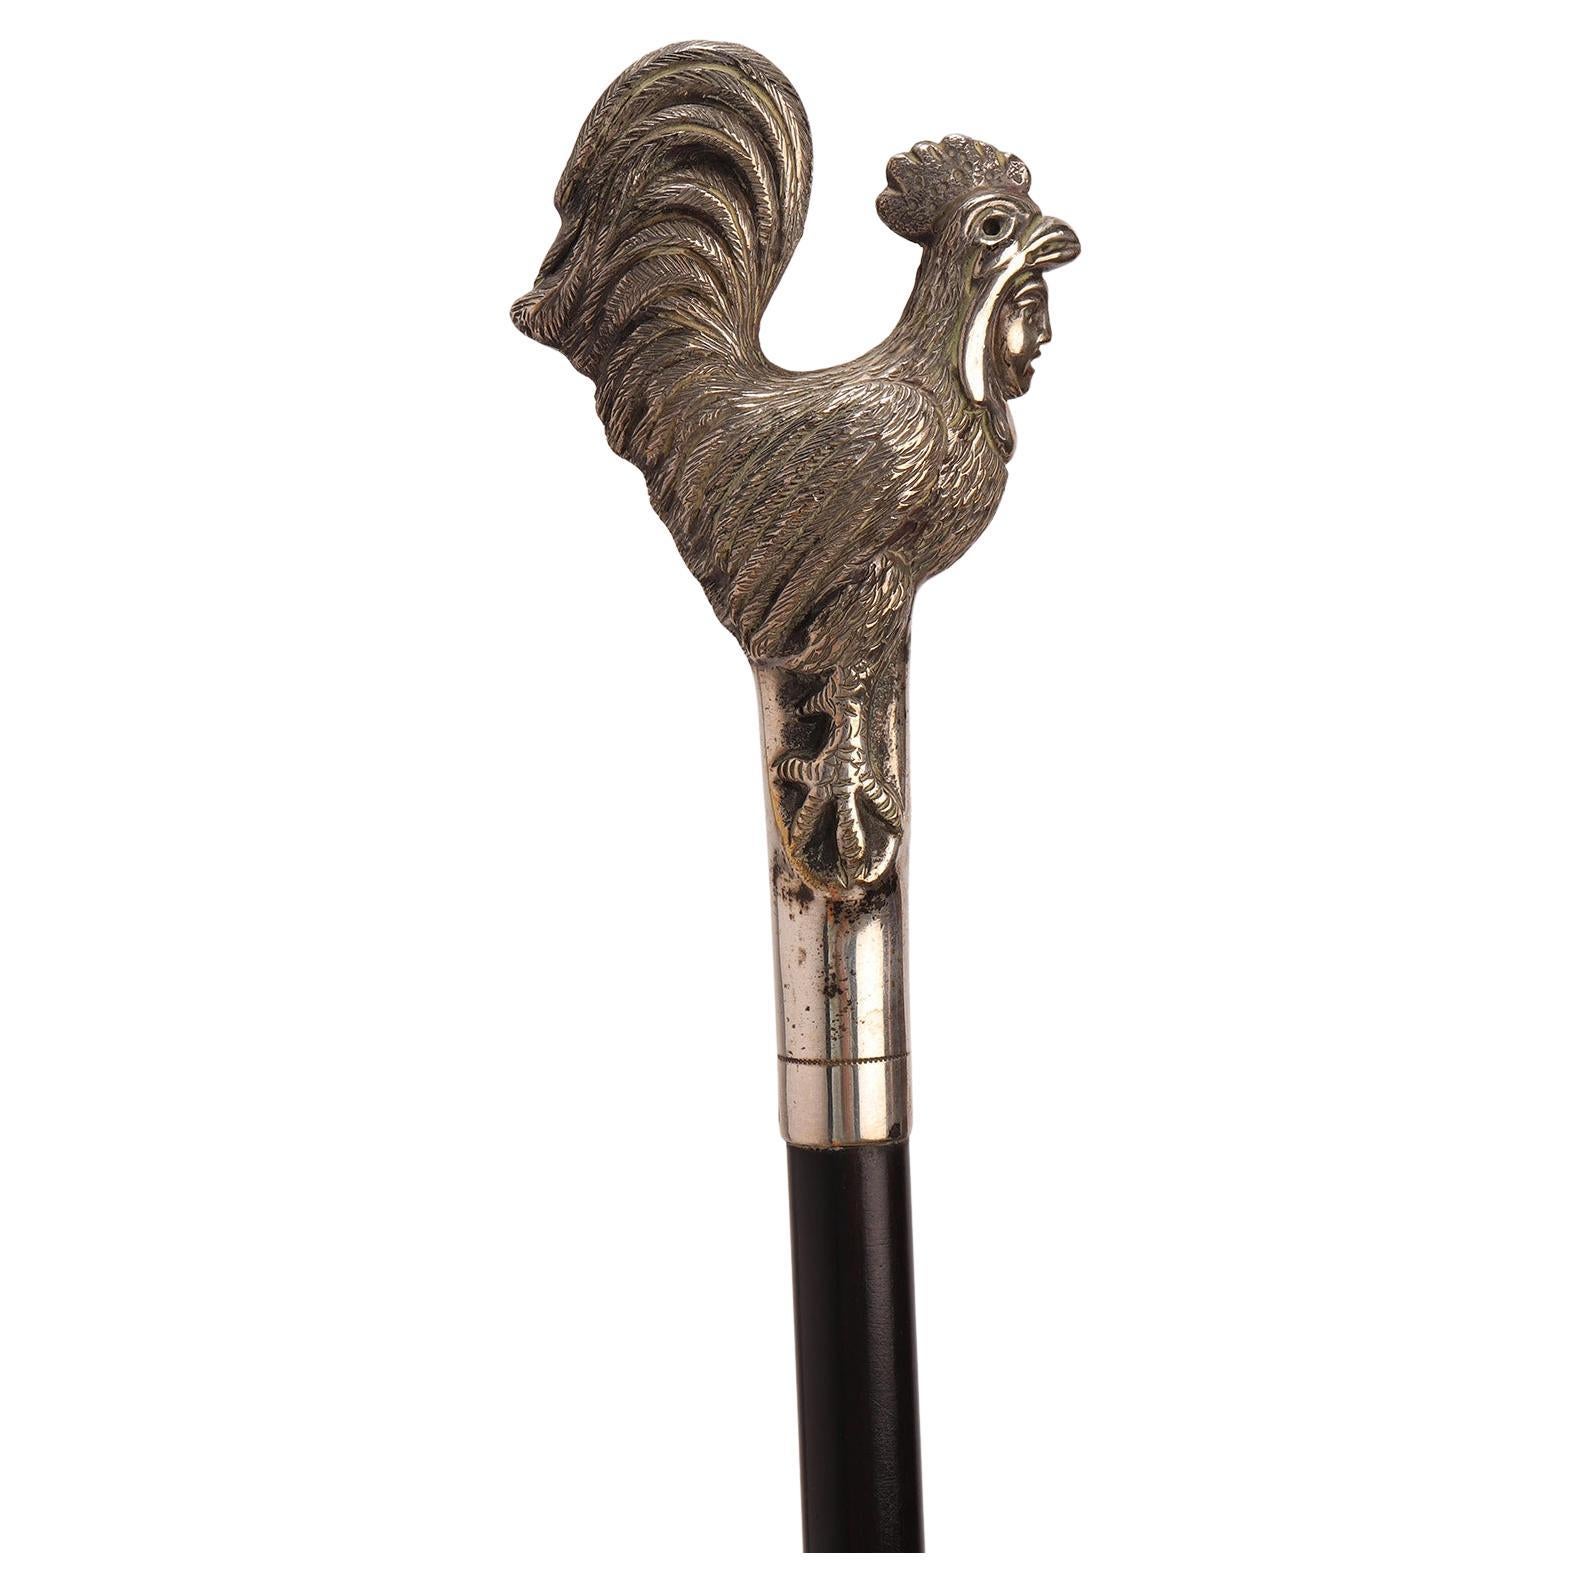 Silver walking stick with a rooster, France 1890.